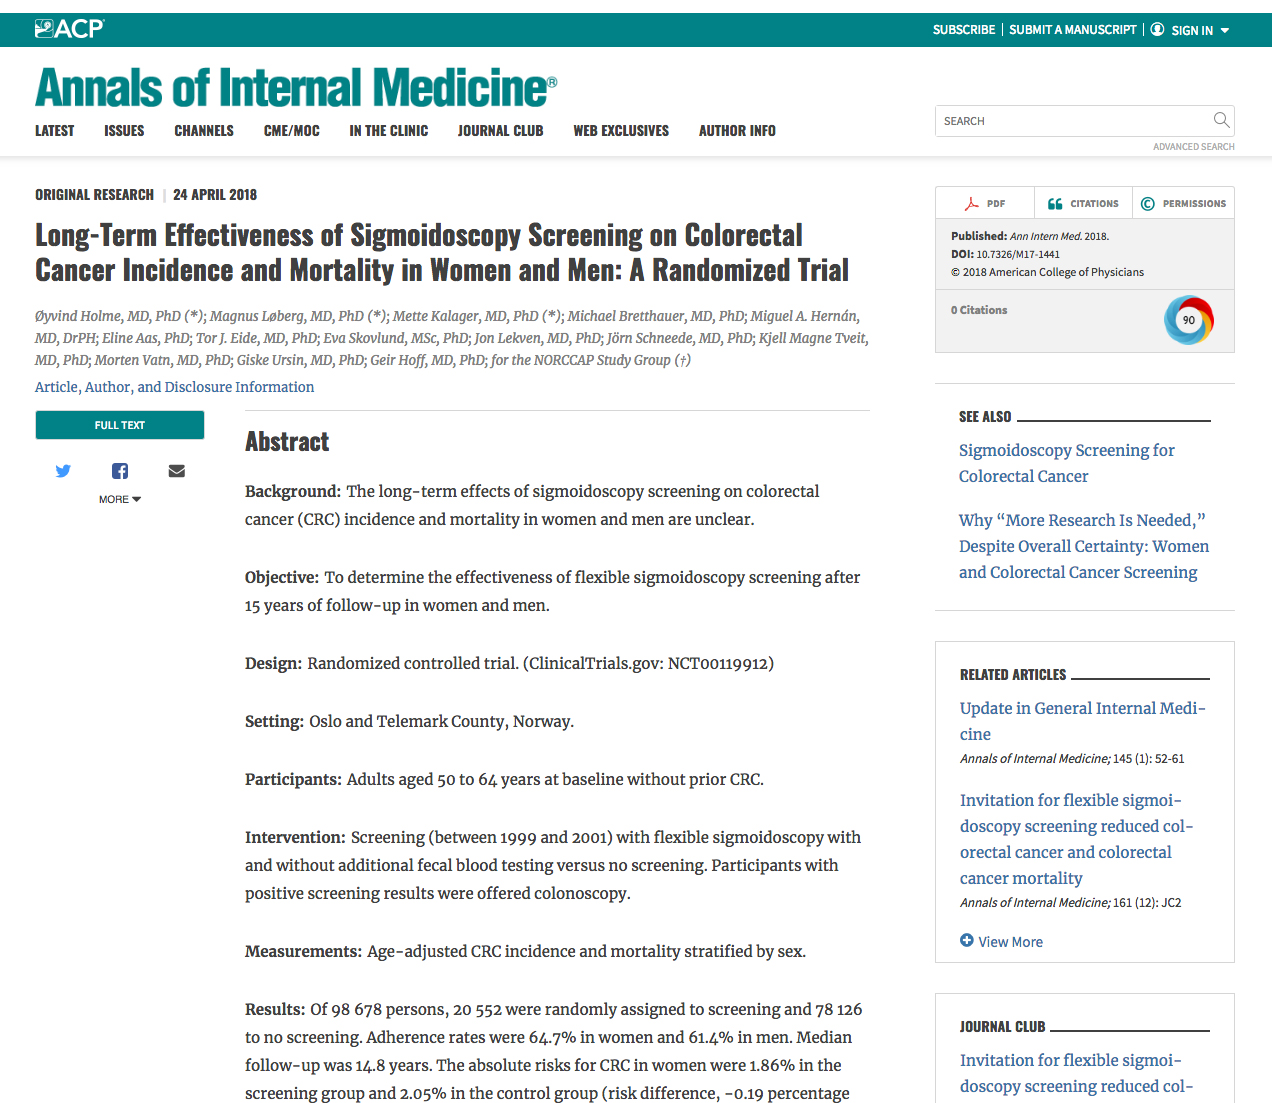 Original Research Results Published in the Annals of Internal Medicine